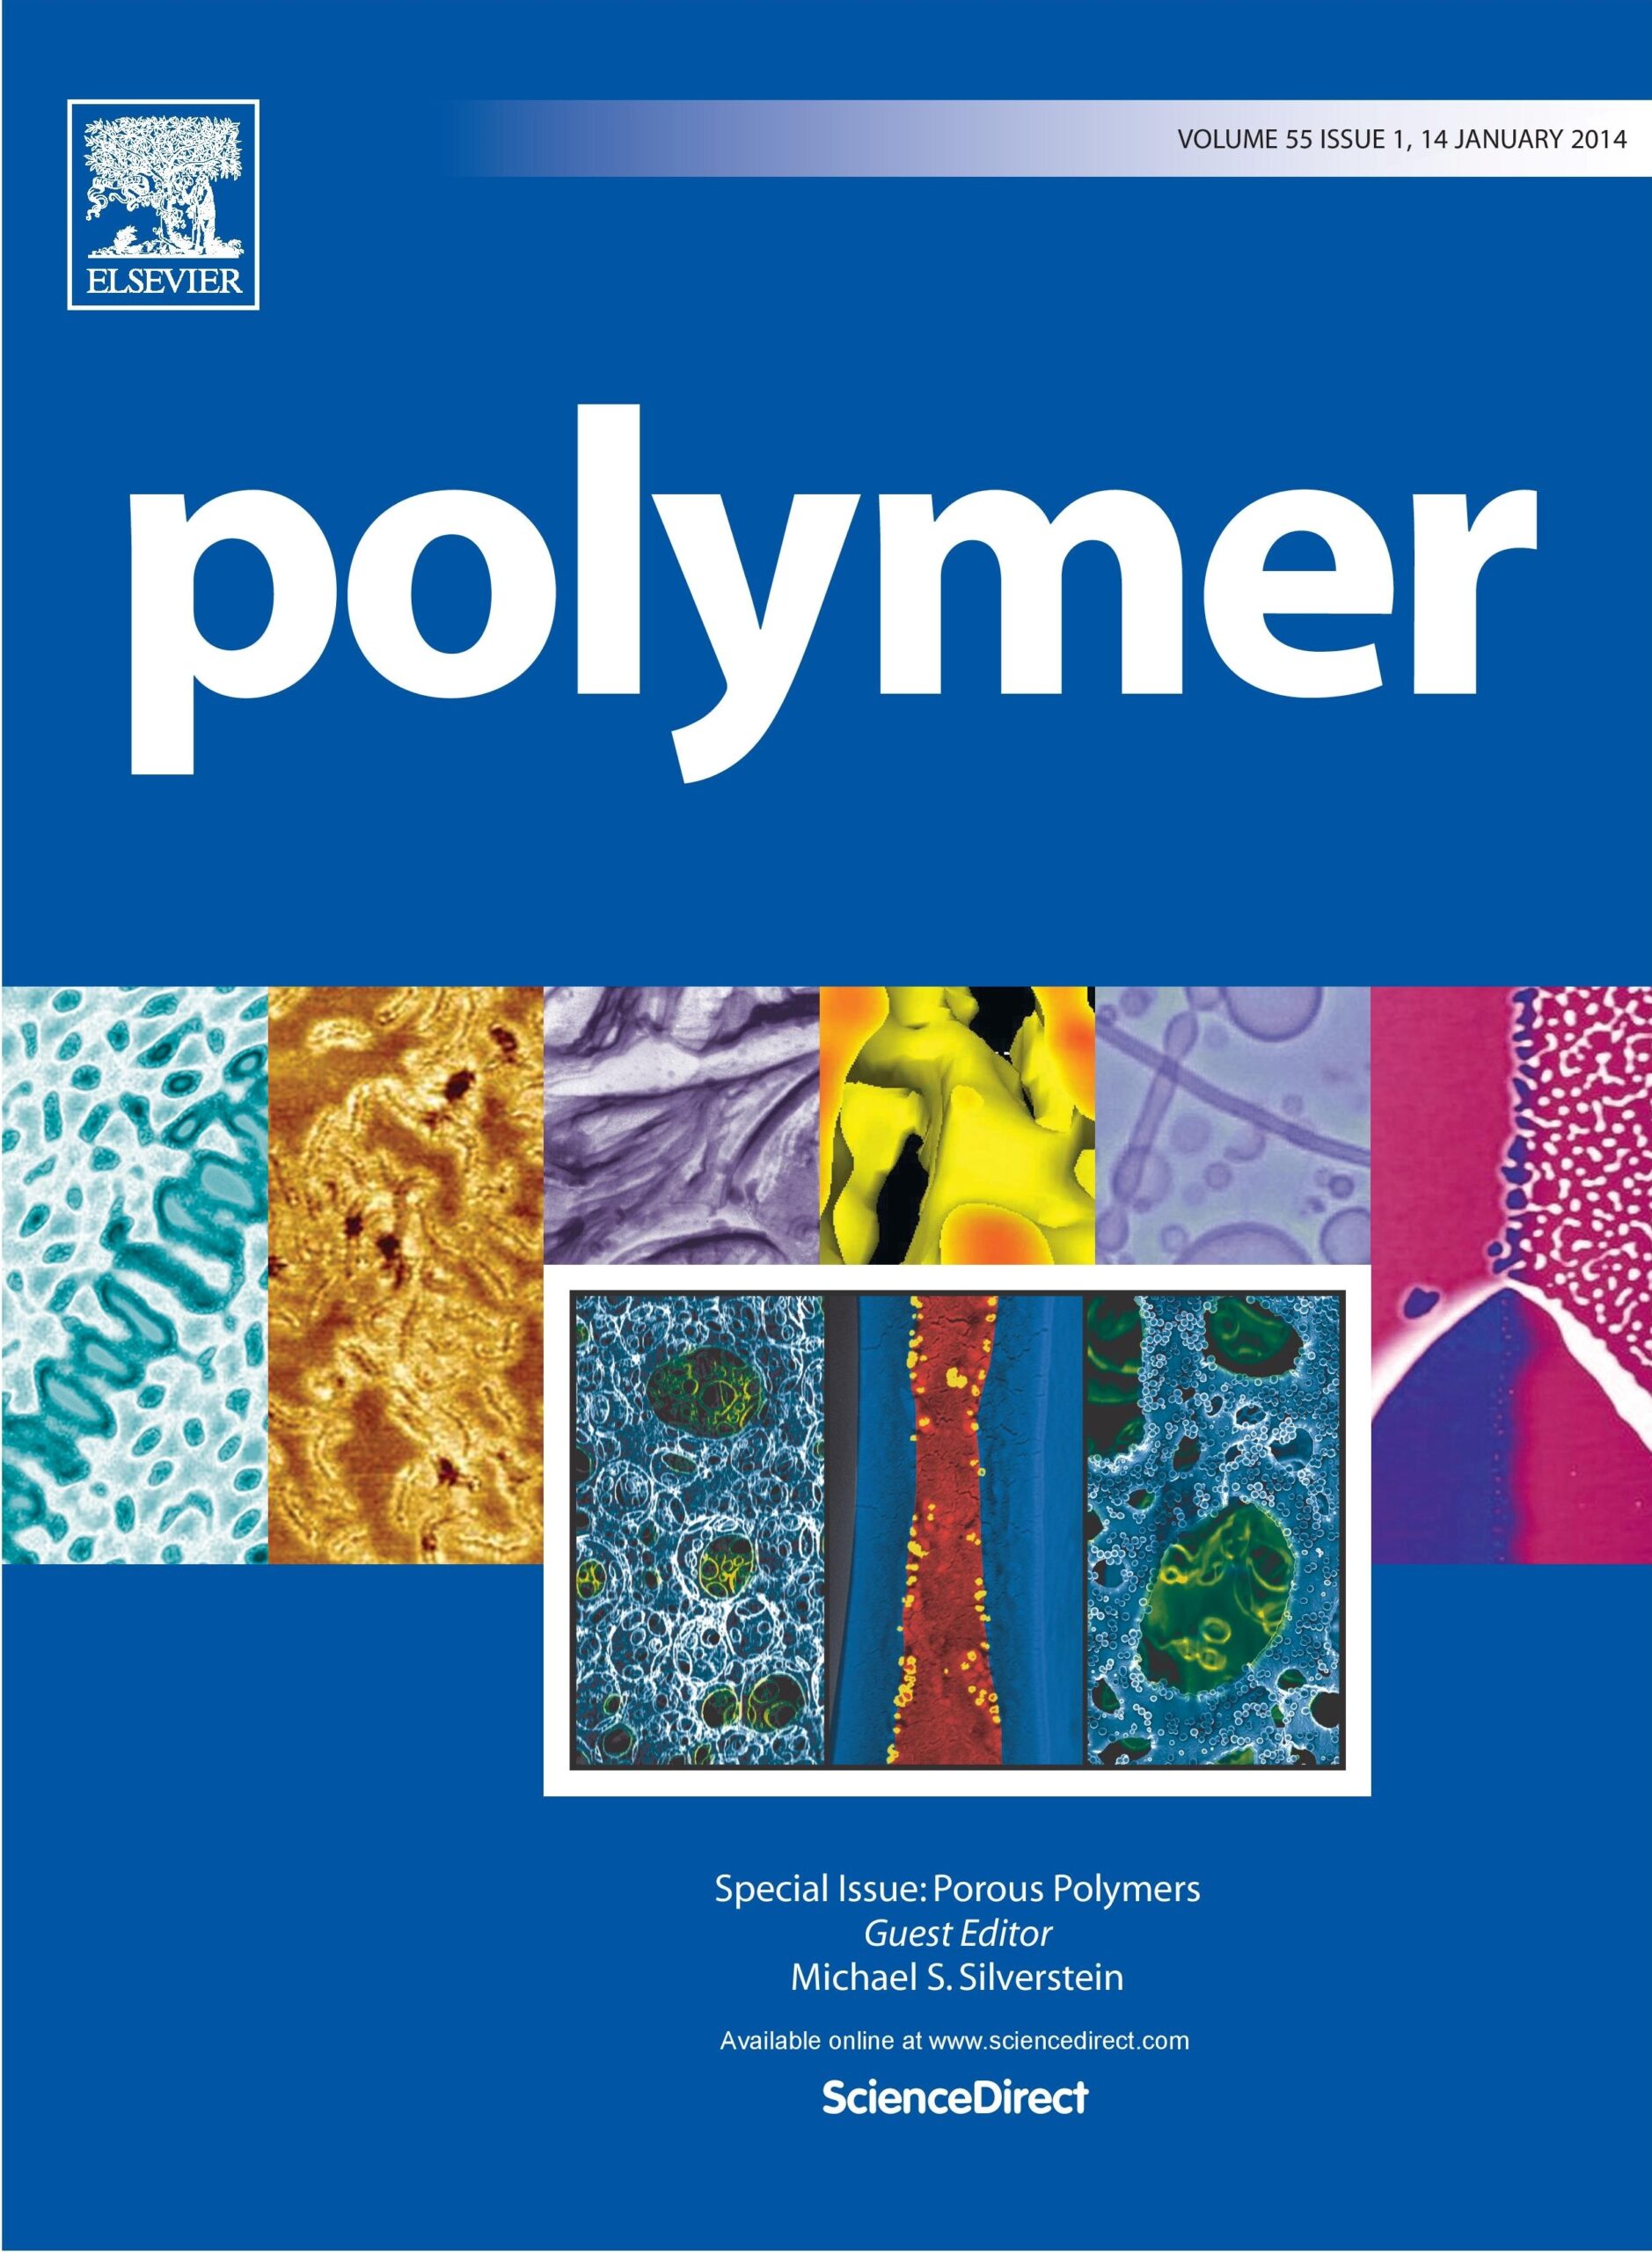 Polymer - Volume 55 Issue 1, 14 January 2014 Picture